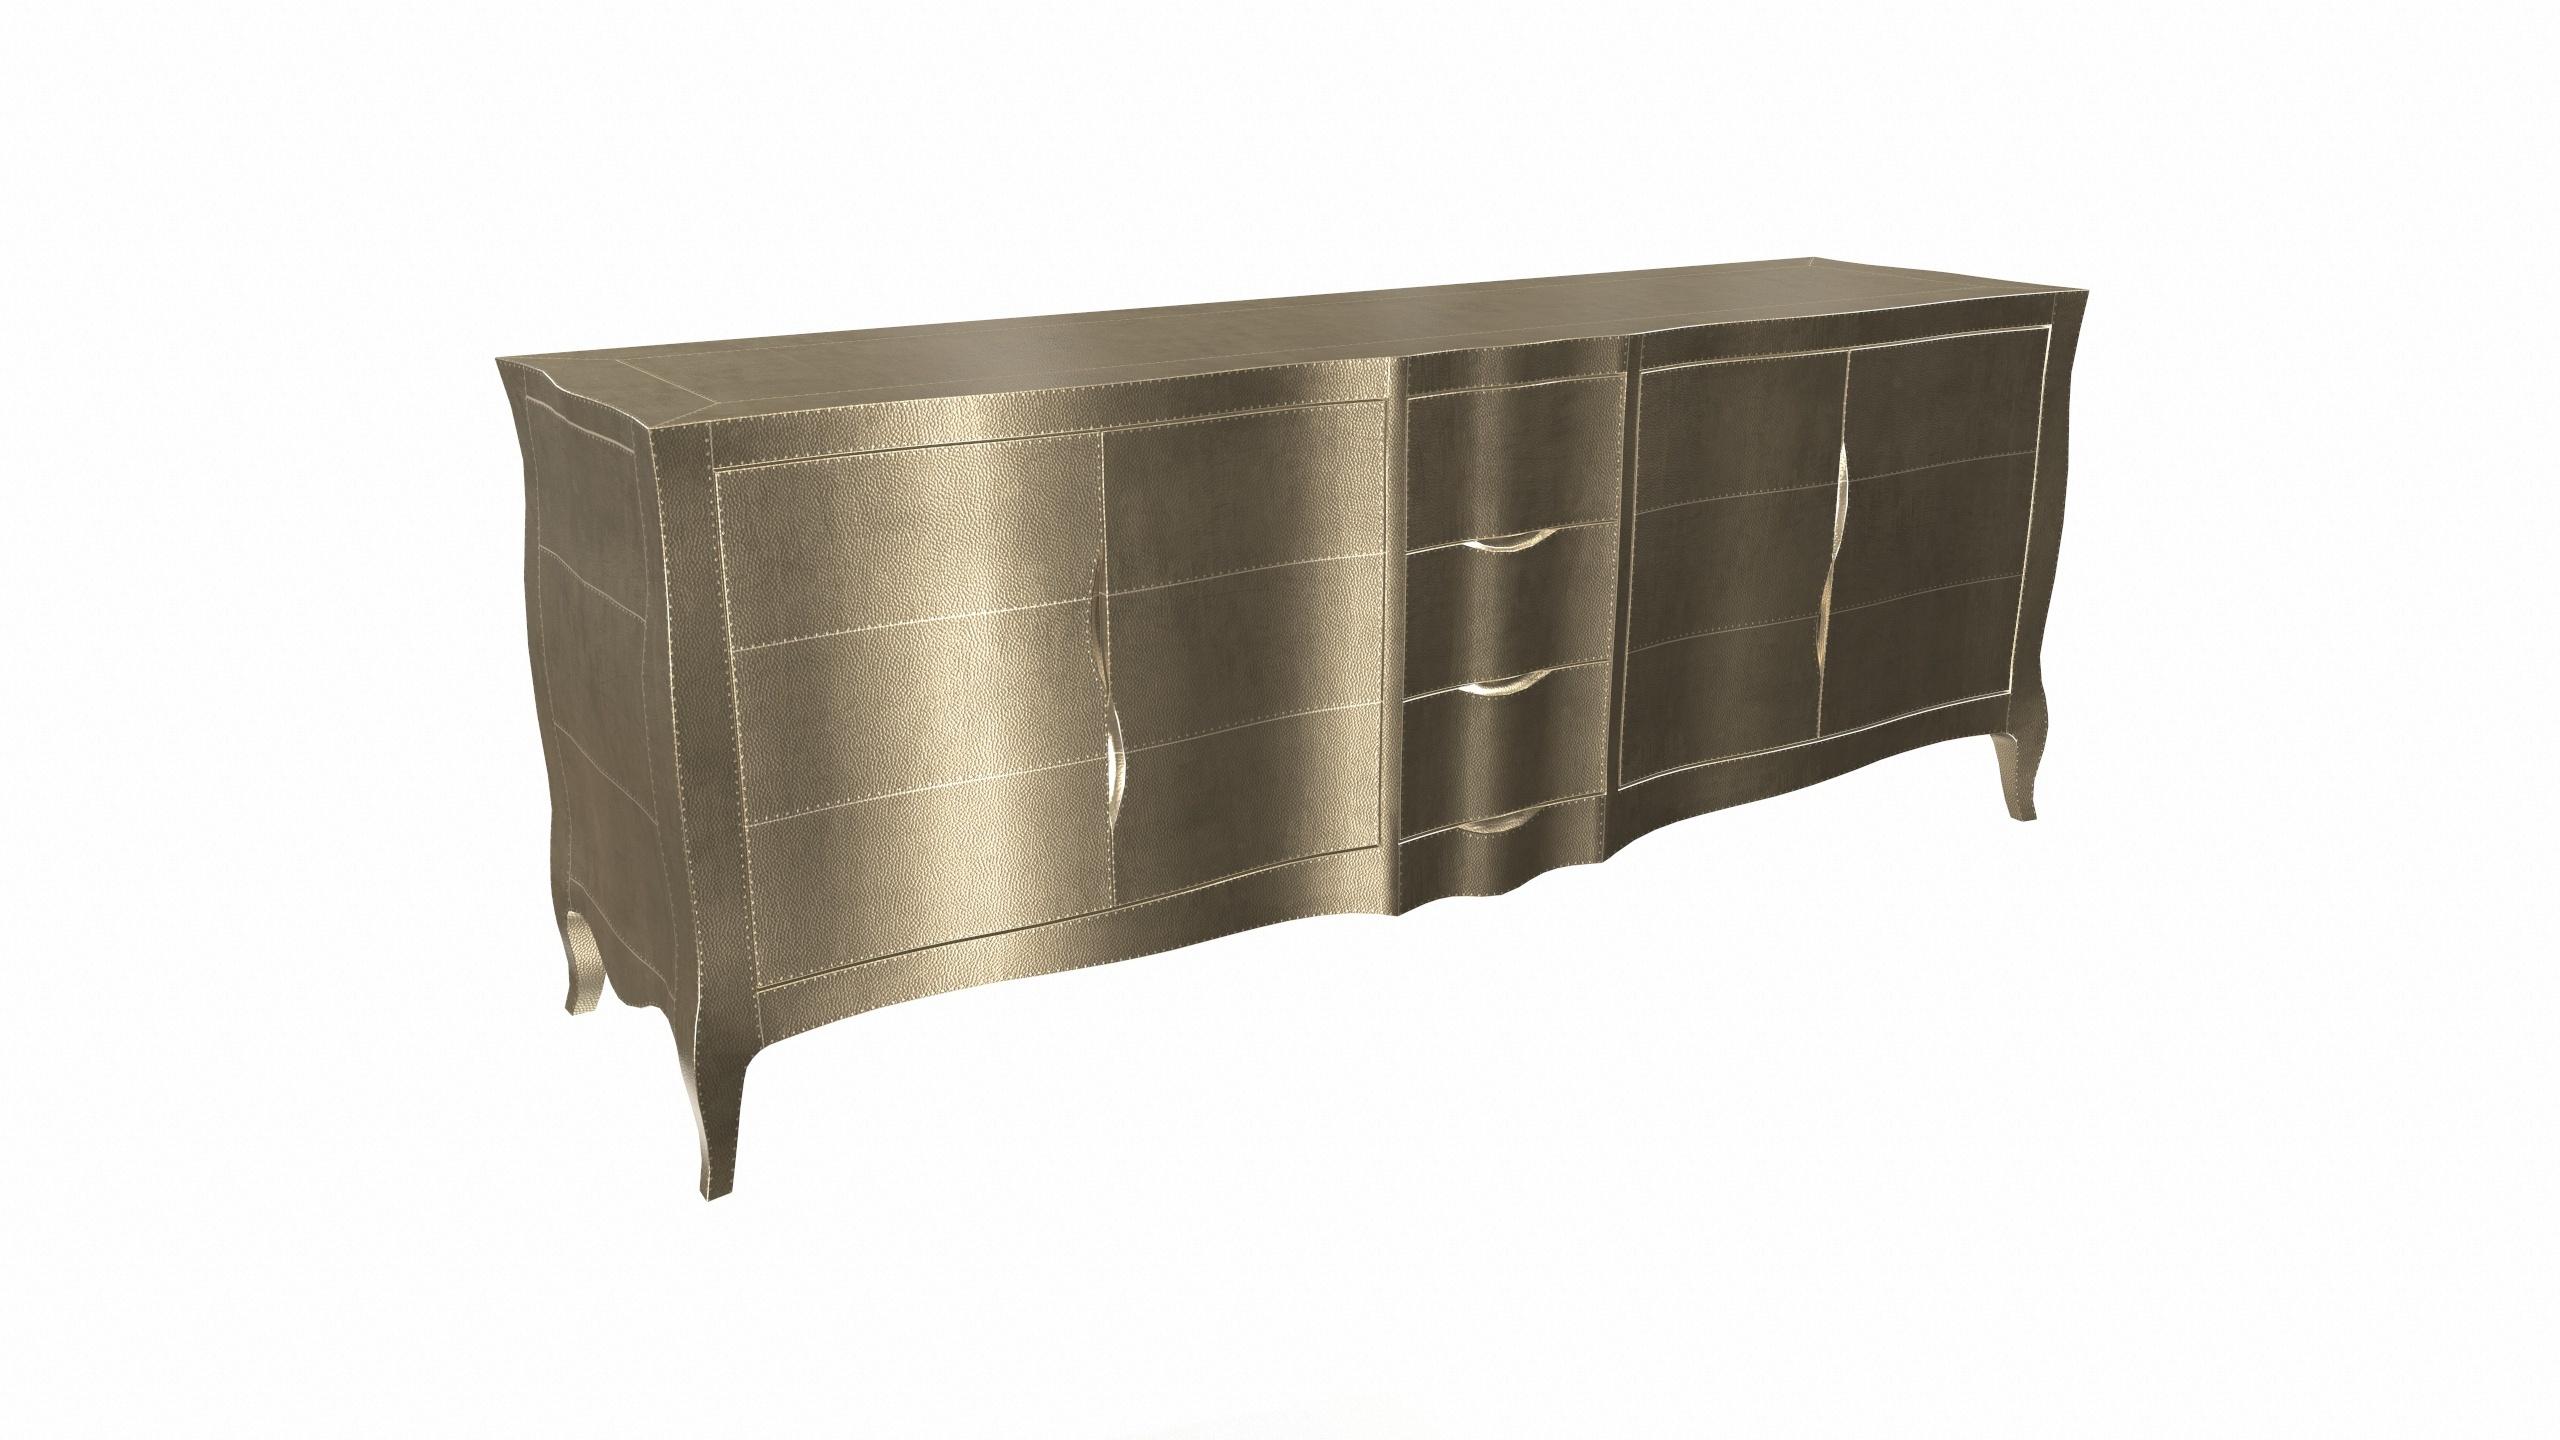 Contemporary Louise Credenza Art Deco Bookcases in Mid. Hammered Brass by Paul Mathieu For Sale